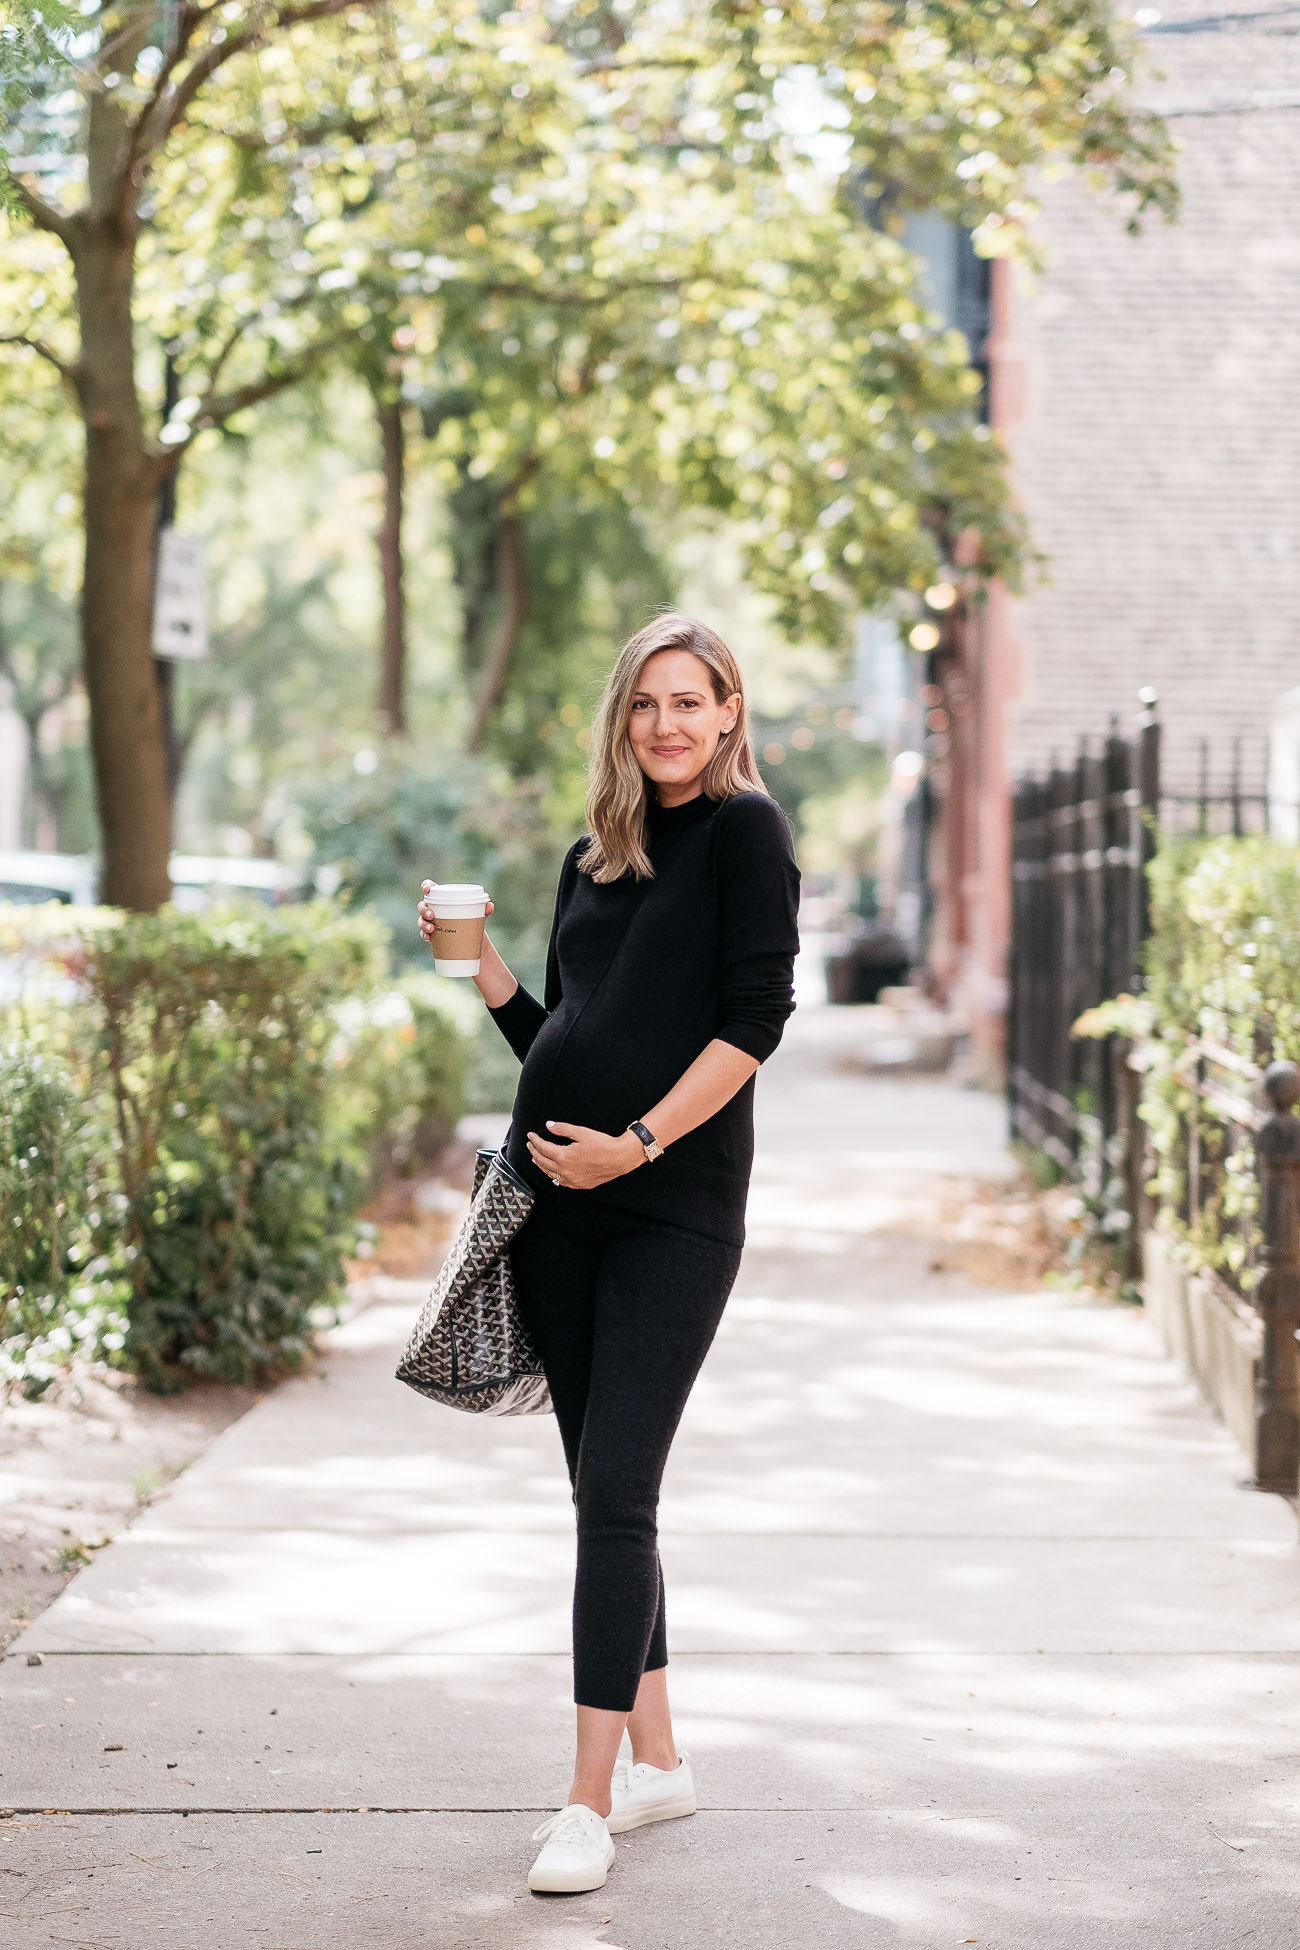 woman standing on the side walk and wearing all black outfit from Banana Republic and holding a drink